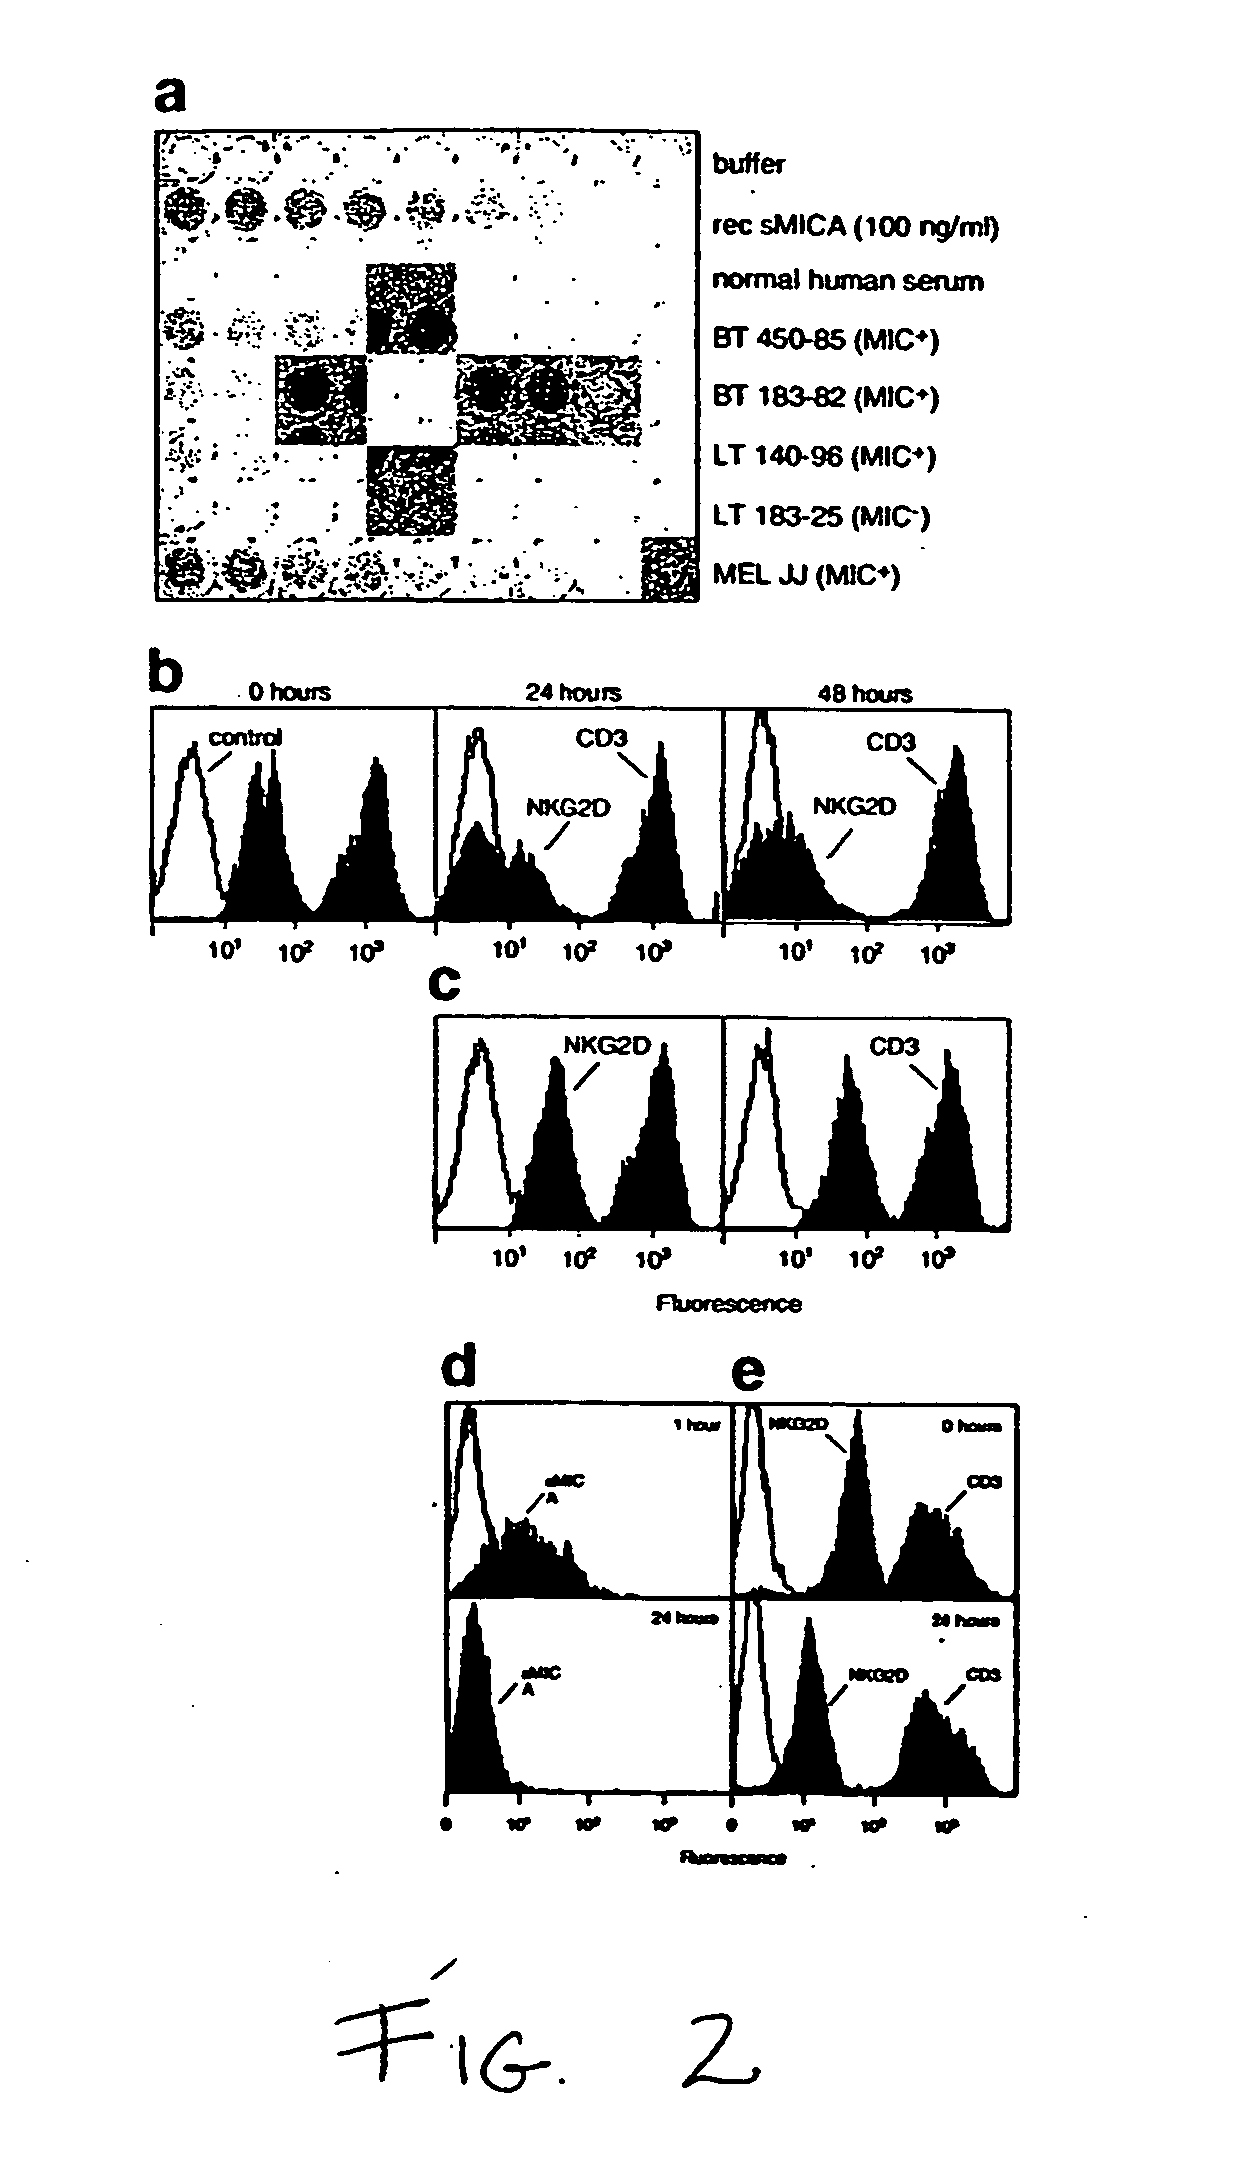 Soluble mic polypeptides as markers for diagnosis, prognosis and treatment of cancer and autoimmune diseases or conditions